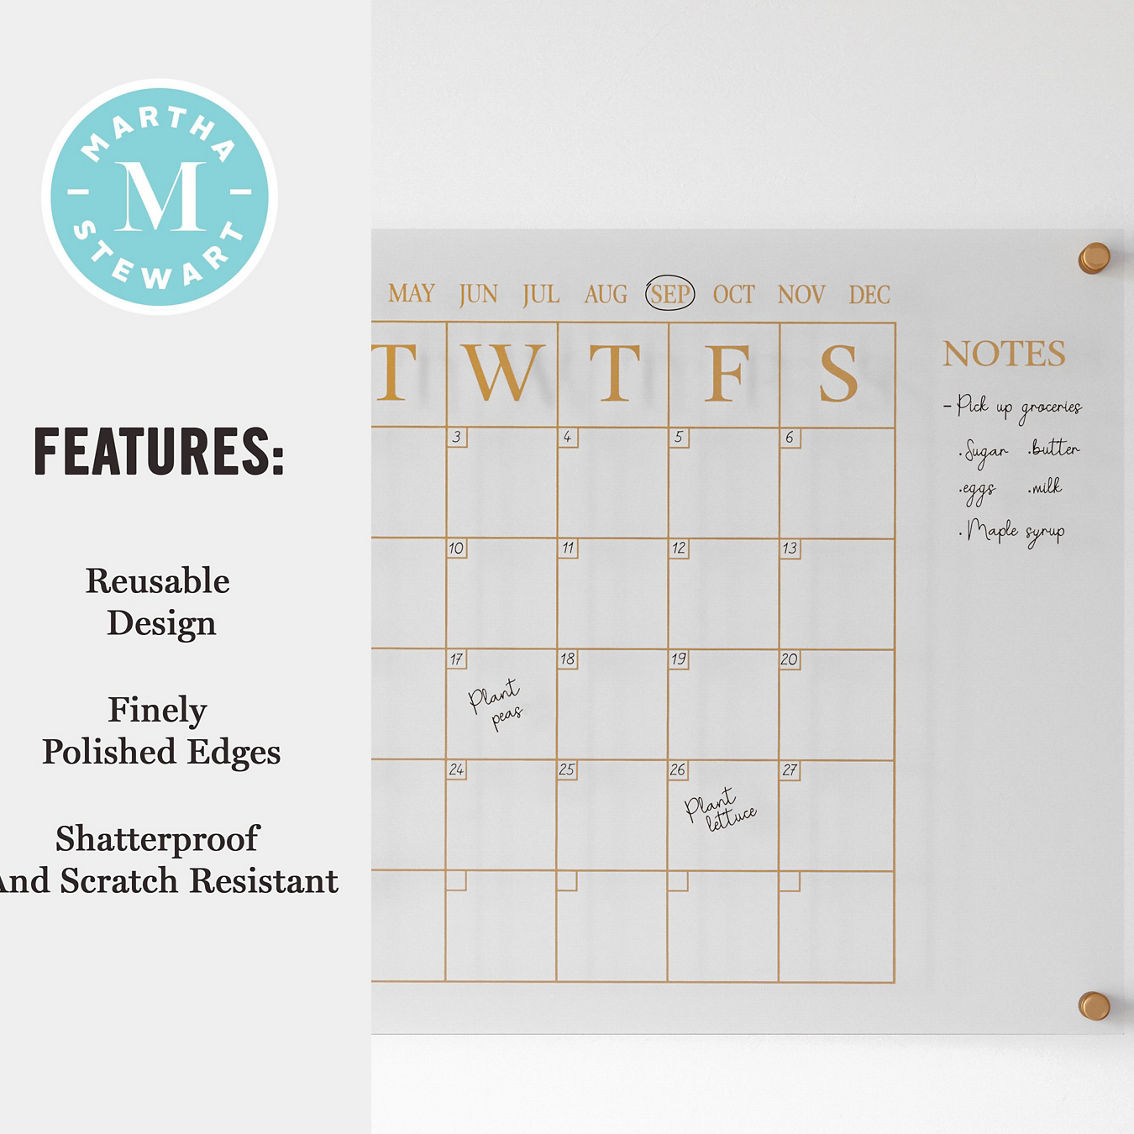 Martha Stewart Acrylic Monthly Wall Calendar with Notes - Image 5 of 5